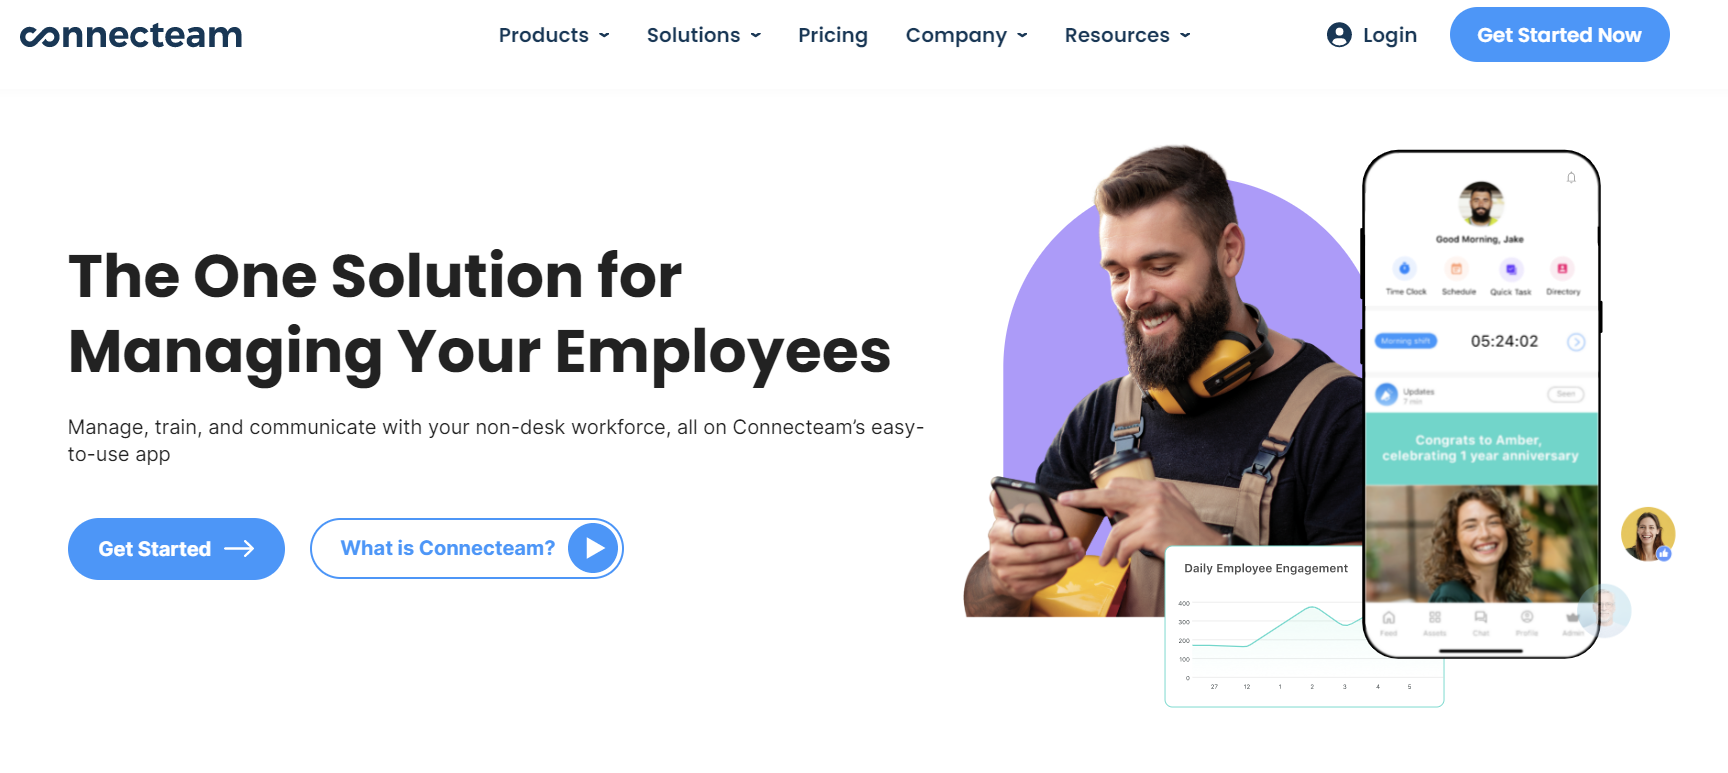 Connecteam is a mobile employee directory software that offers advanced search capabilities, making it easy to find and contact work colleagues. 